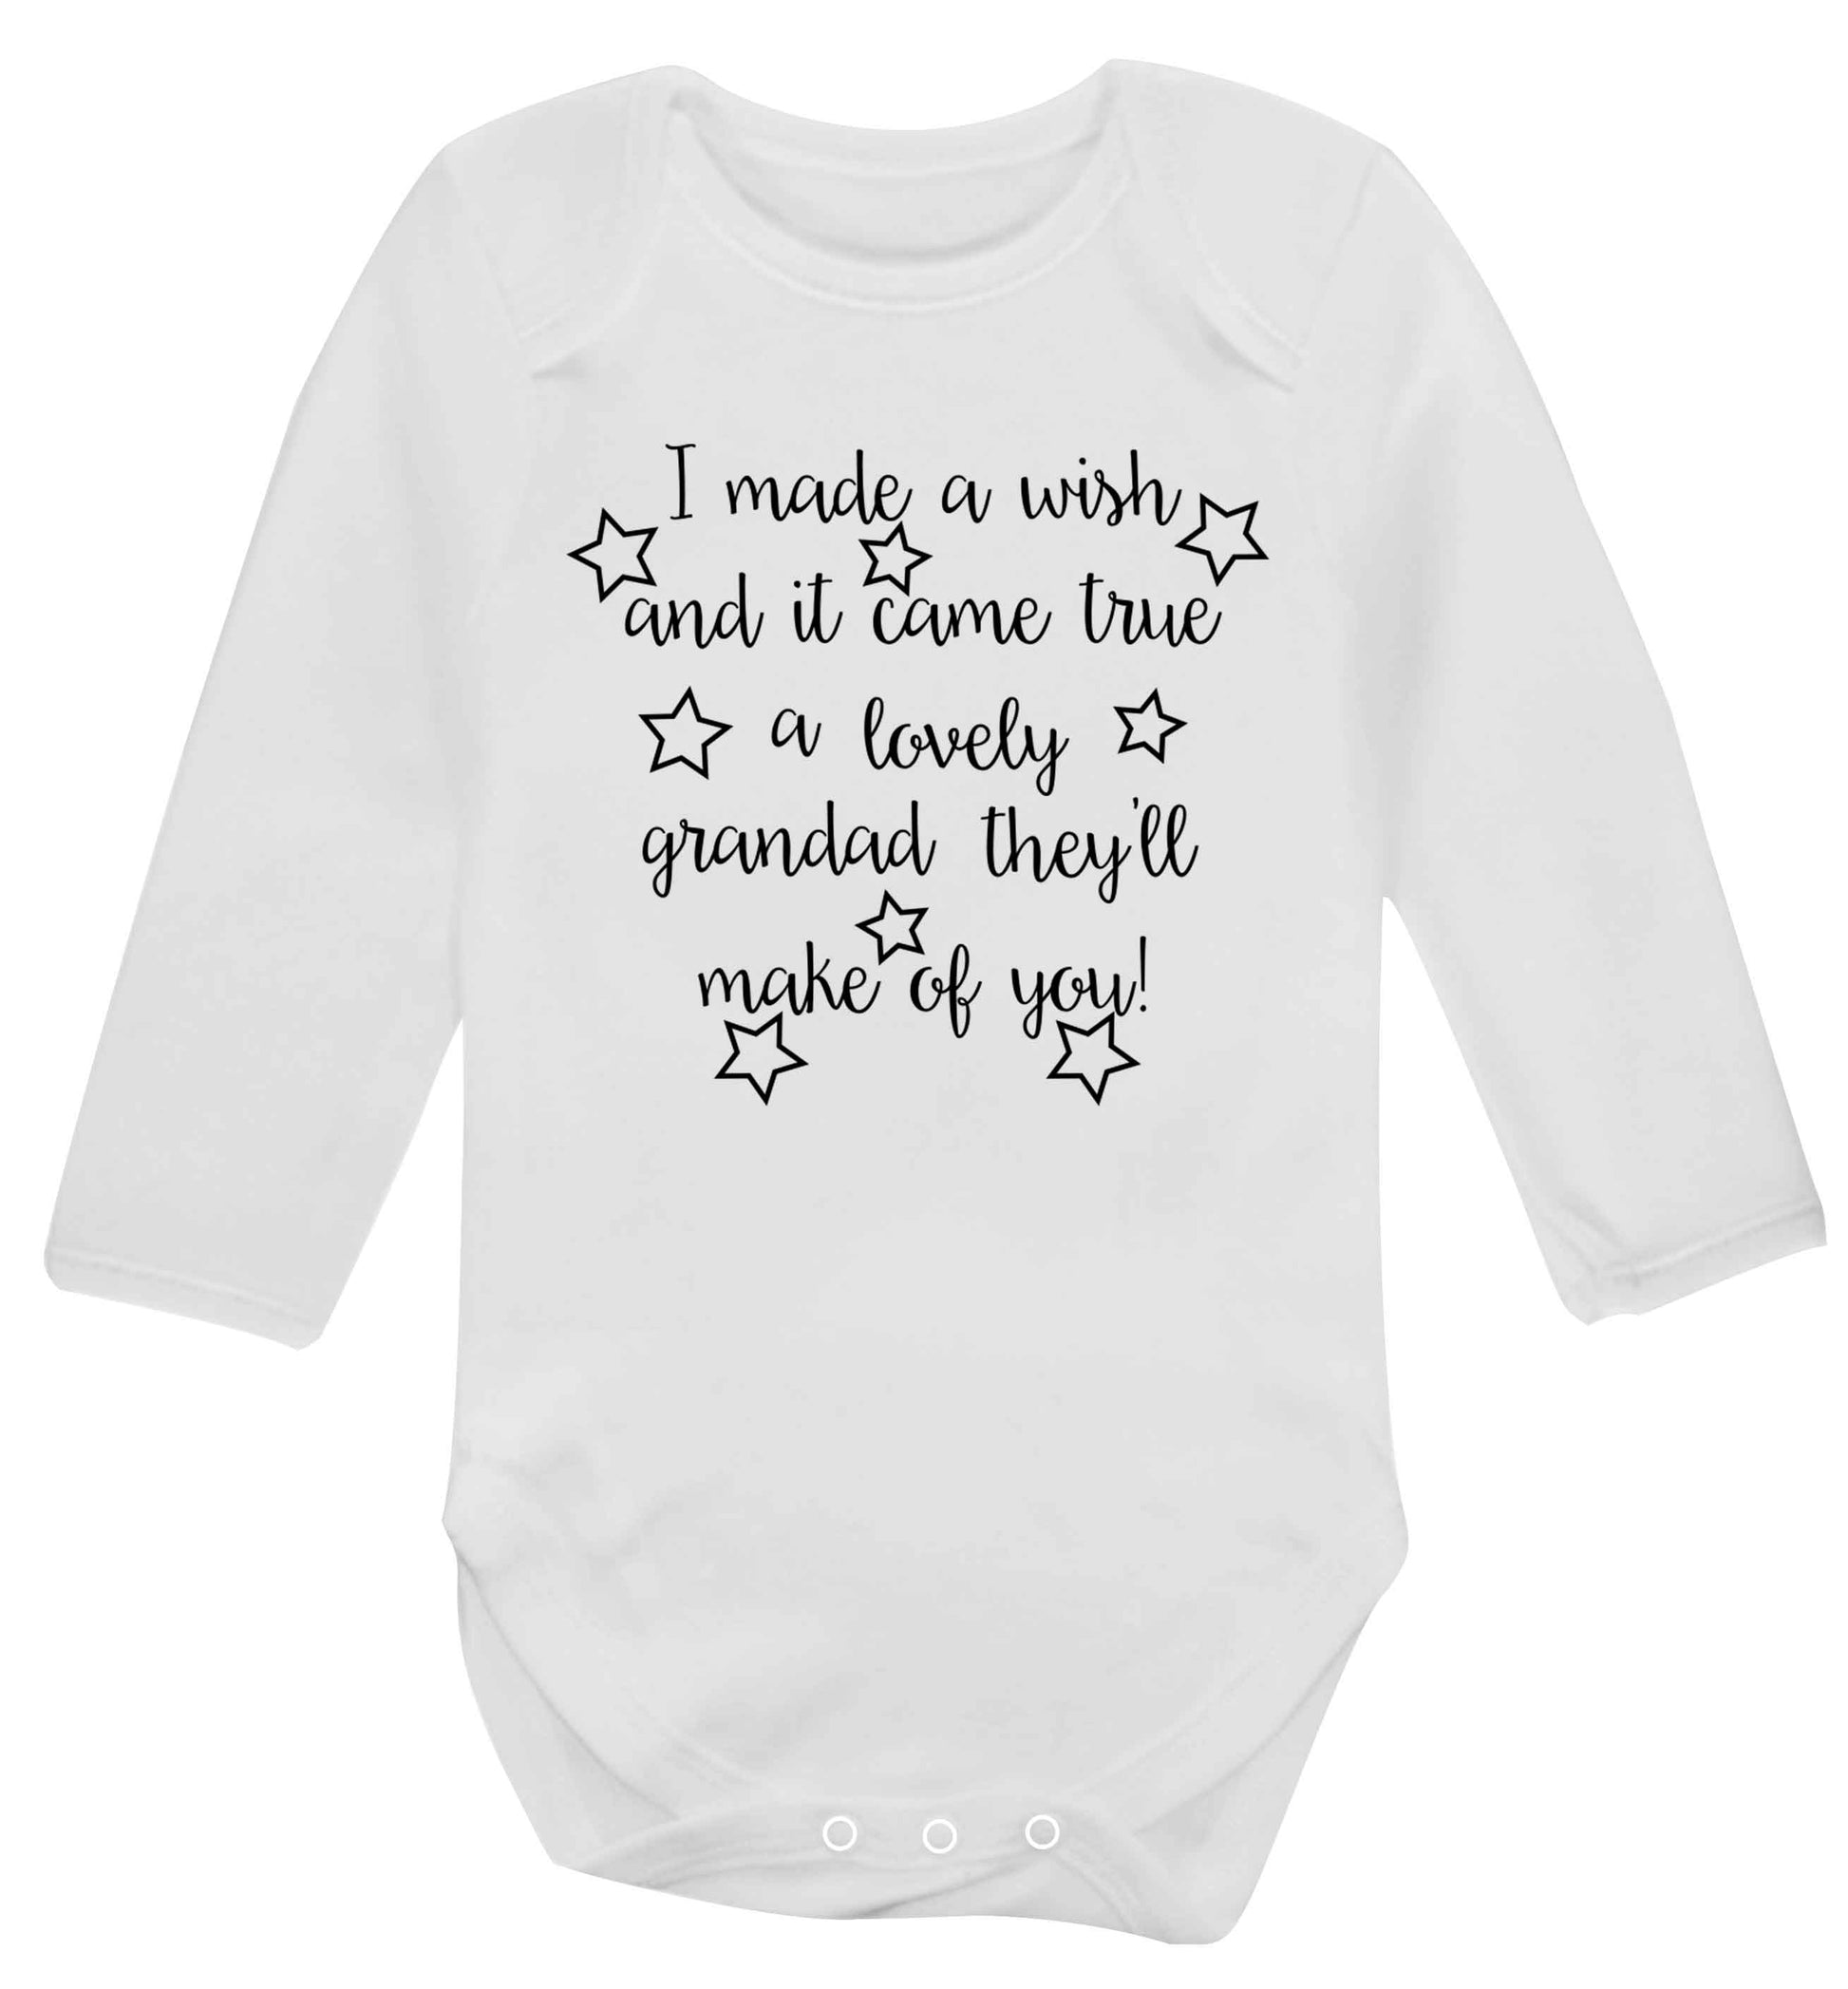 I made a wish and it came true a lovely grandad they'll make of you! Baby Vest long sleeved white 6-12 months